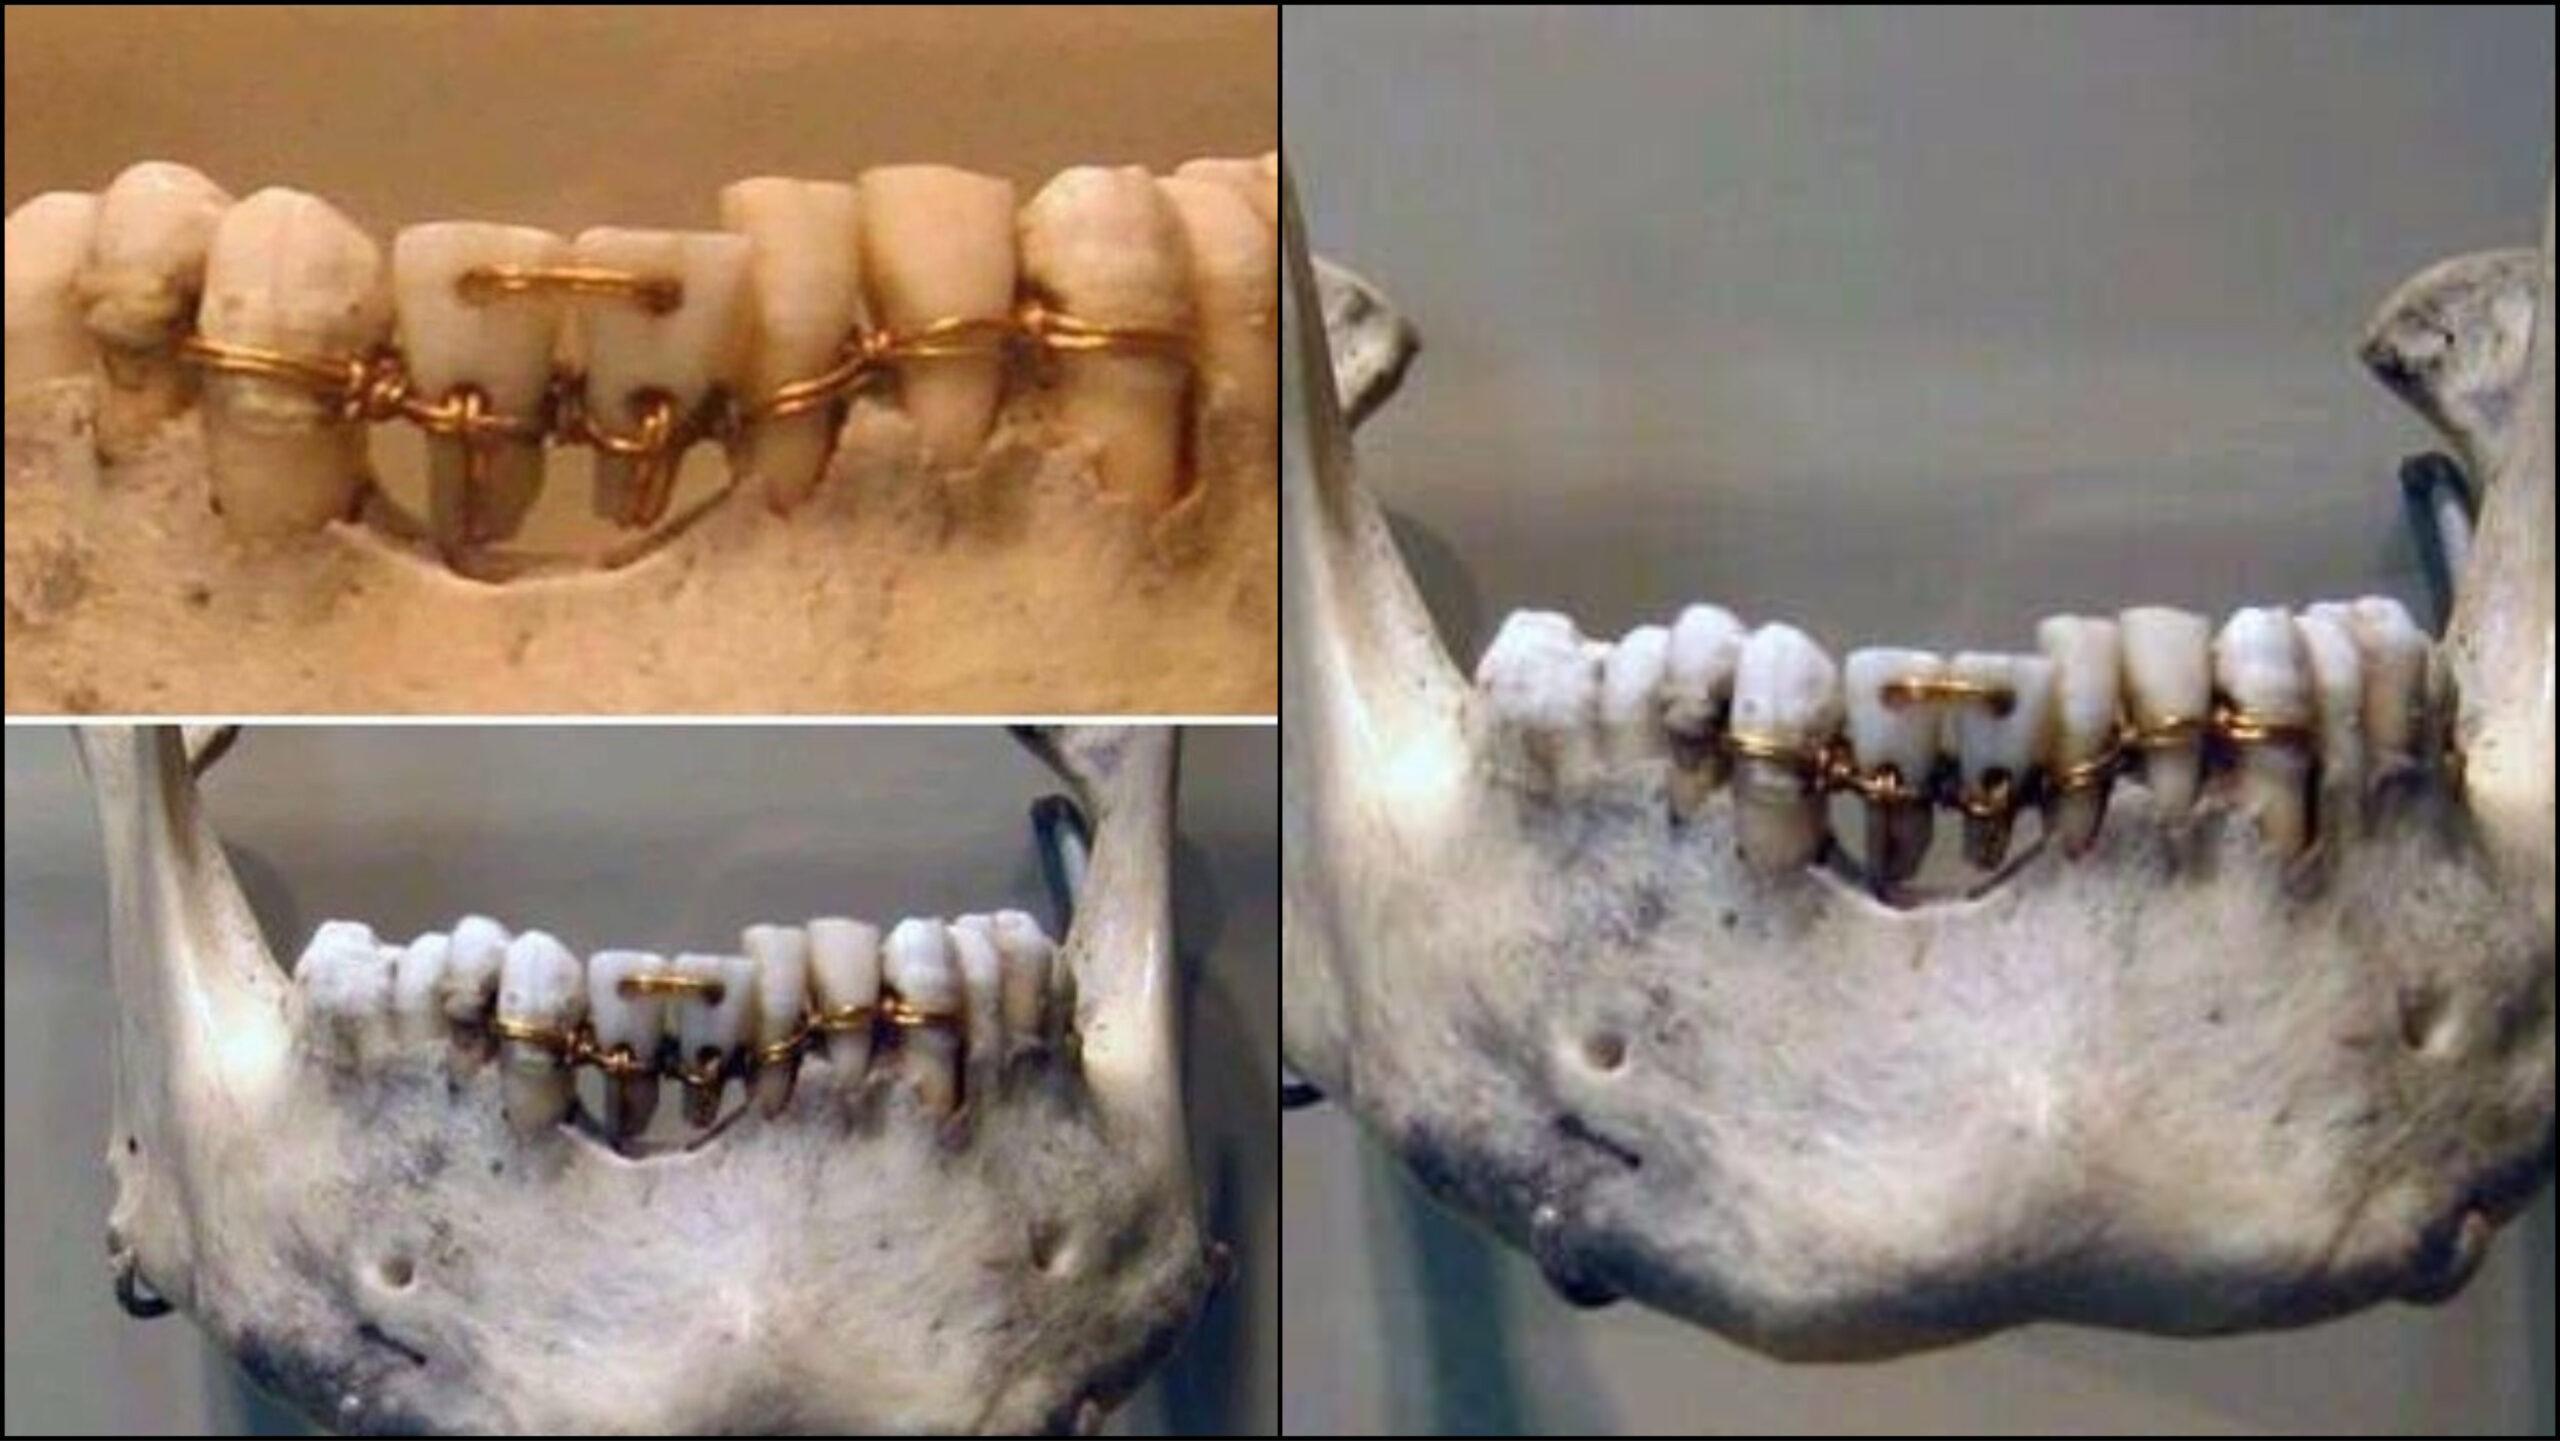 Incredible dental work found on a 4,000-year-old mummy of Ancient Egypt